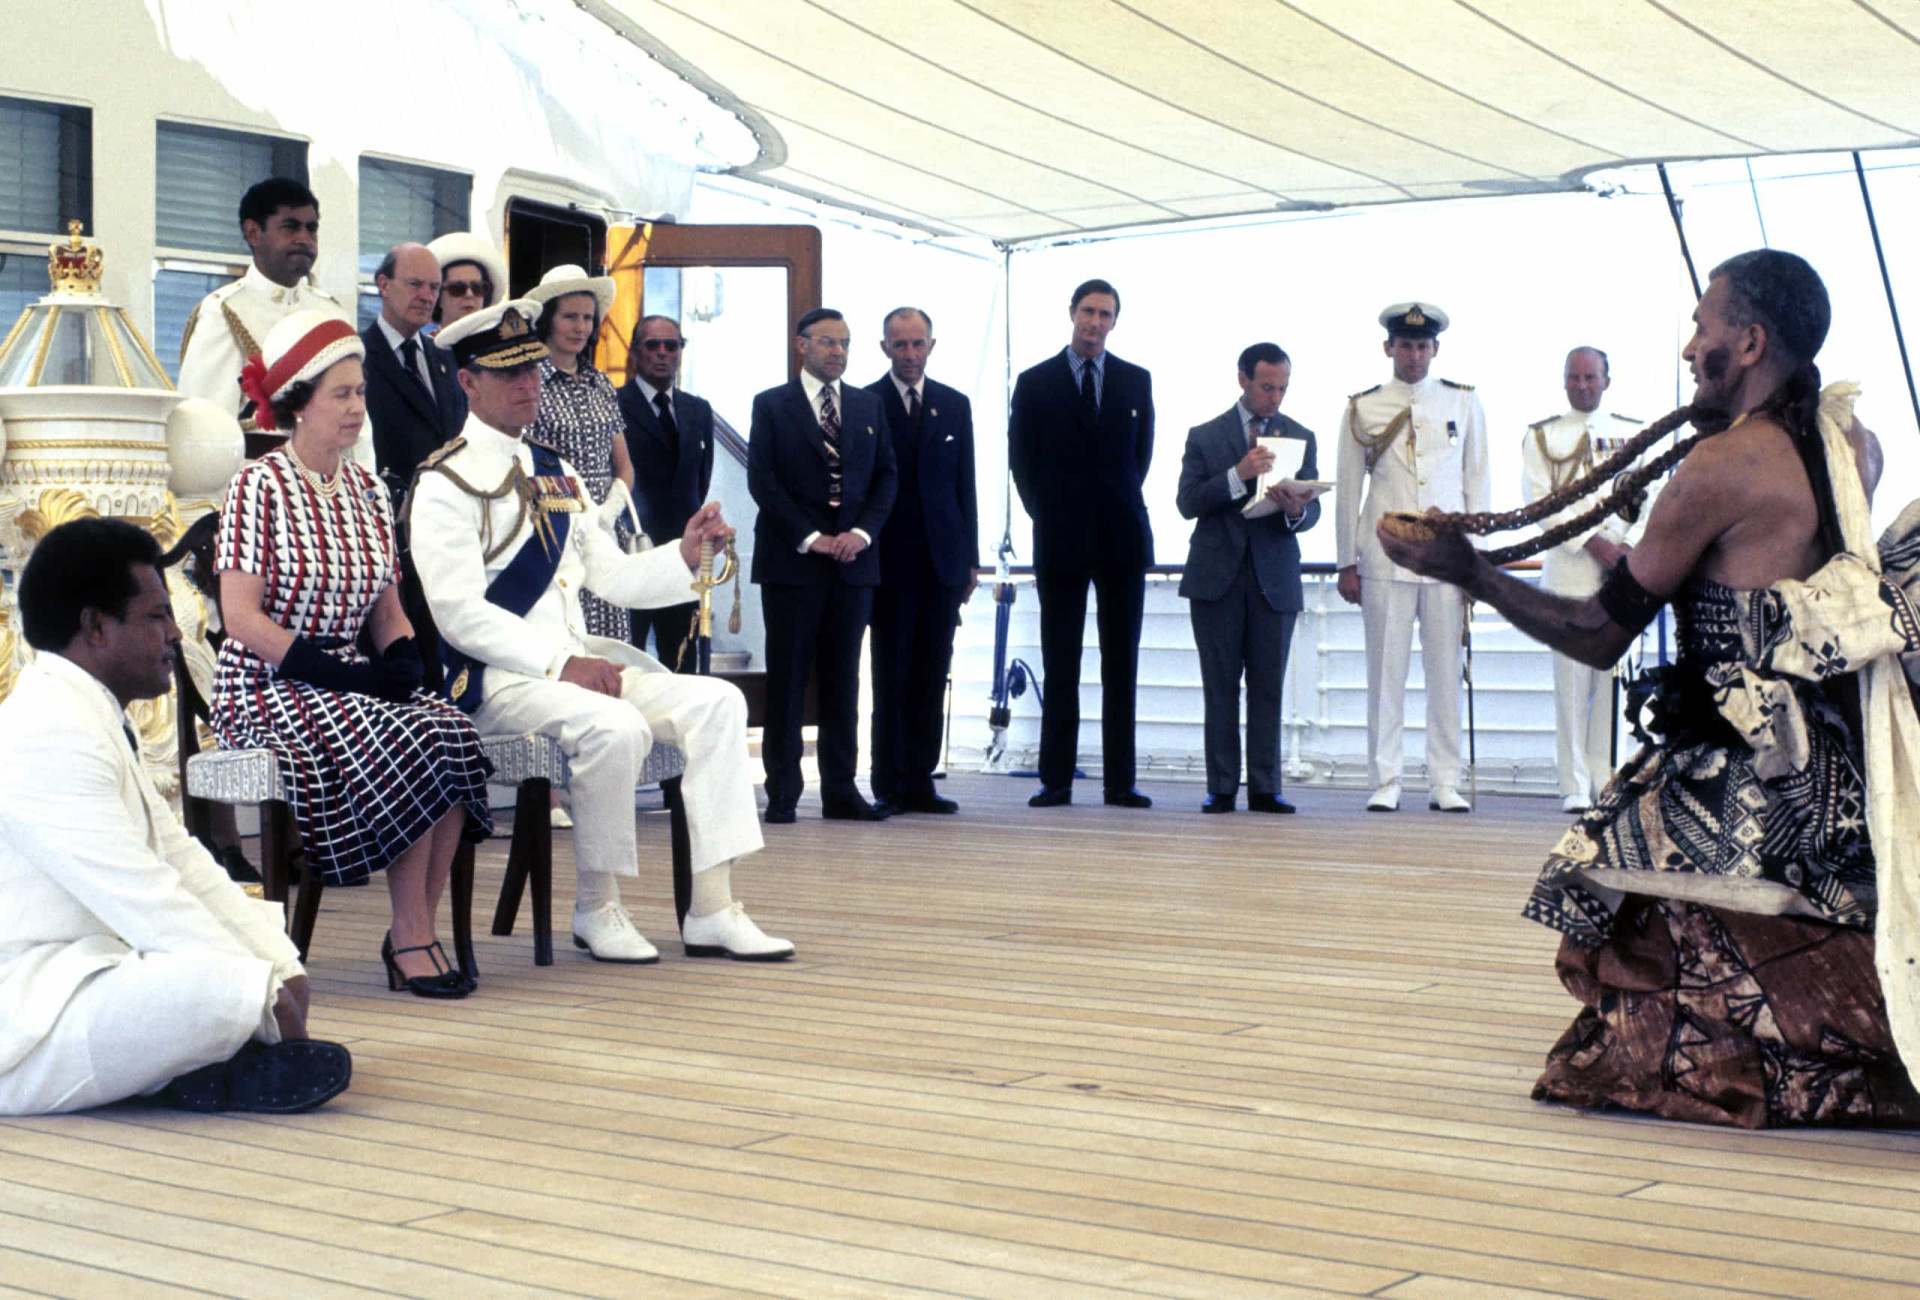 <p>Later in the summer, the Queen and Prince Philip embarked on a Commonwealth visit that first brought them to island nations such as Fiji and Tonga. Pictured is the royal couple receiving and being entertained by Fijian folk and traditional dancers on board  <em>Britannia</em>. The voyage continued later with longer stints in New Zealand and Australia.</p><p><a href="https://www.msn.com/en-us/community/channel/vid-7xx8mnucu55yw63we9va2gwr7uihbxwc68fxqp25x6tg4ftibpra?cvid=94631541bc0f4f89bfd59158d696ad7e">Follow us and access great exclusive content every day</a></p>